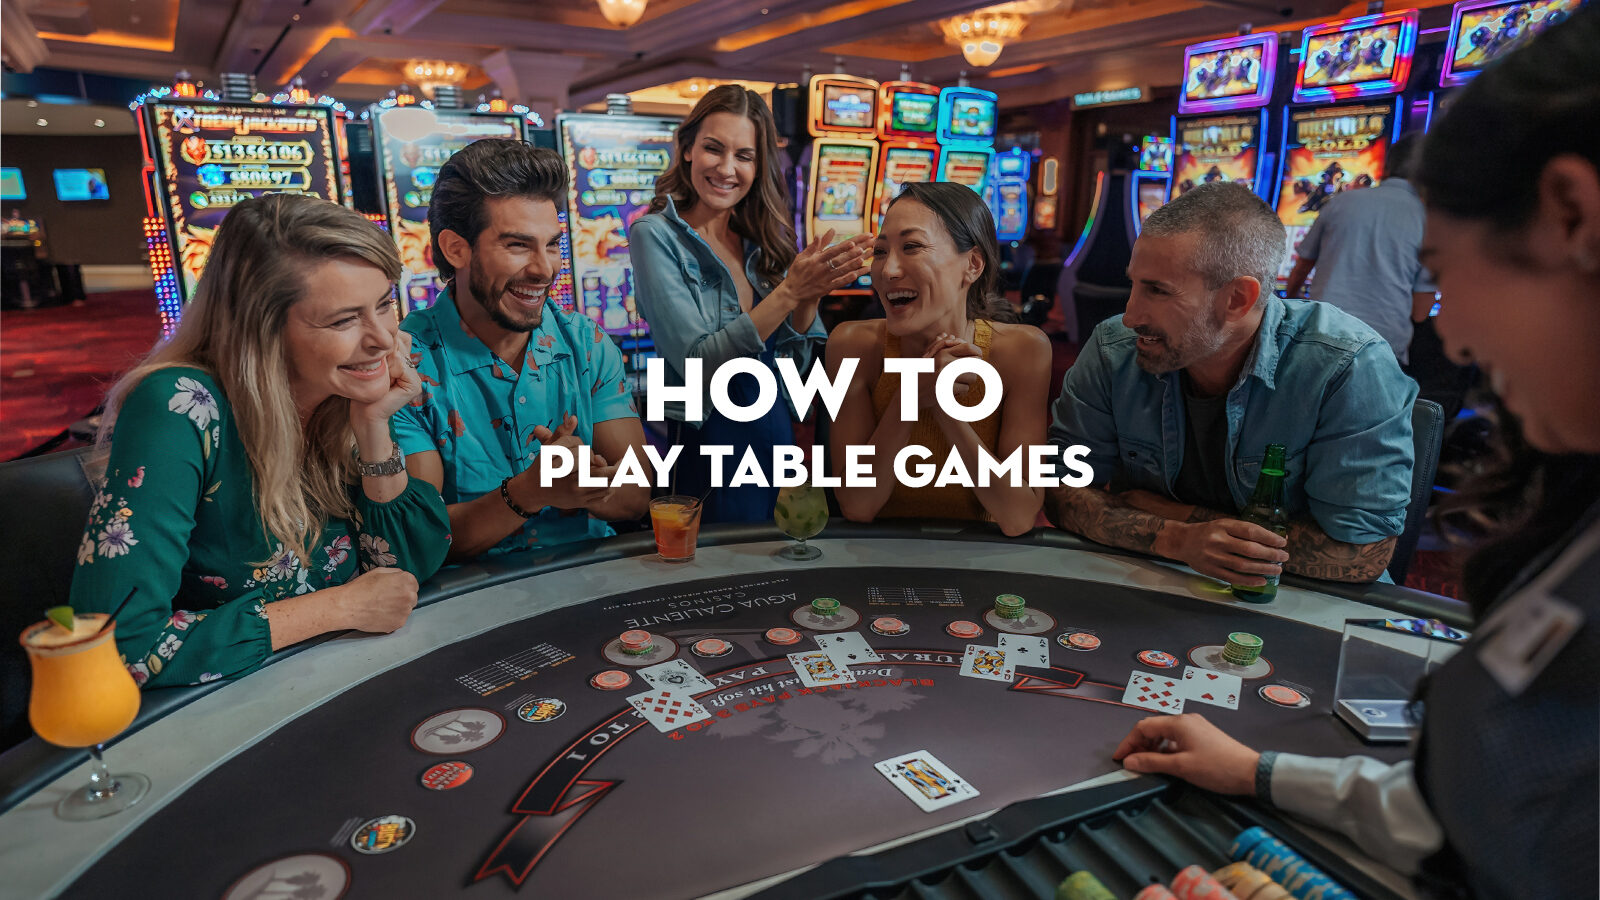 HOW TO PLAY TABLE GAMES